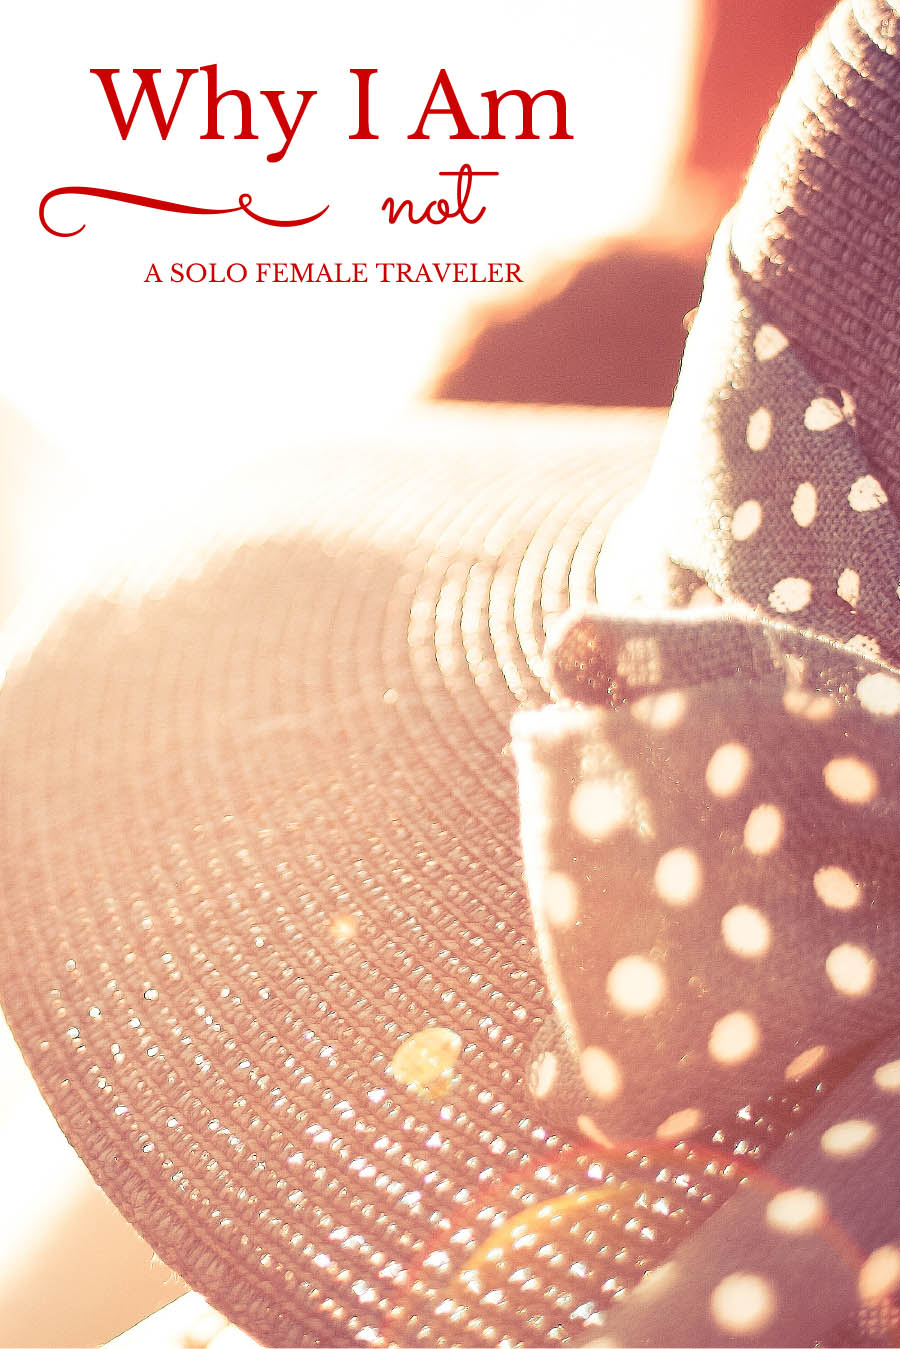 Why I am NOT a Solo Female Traveler